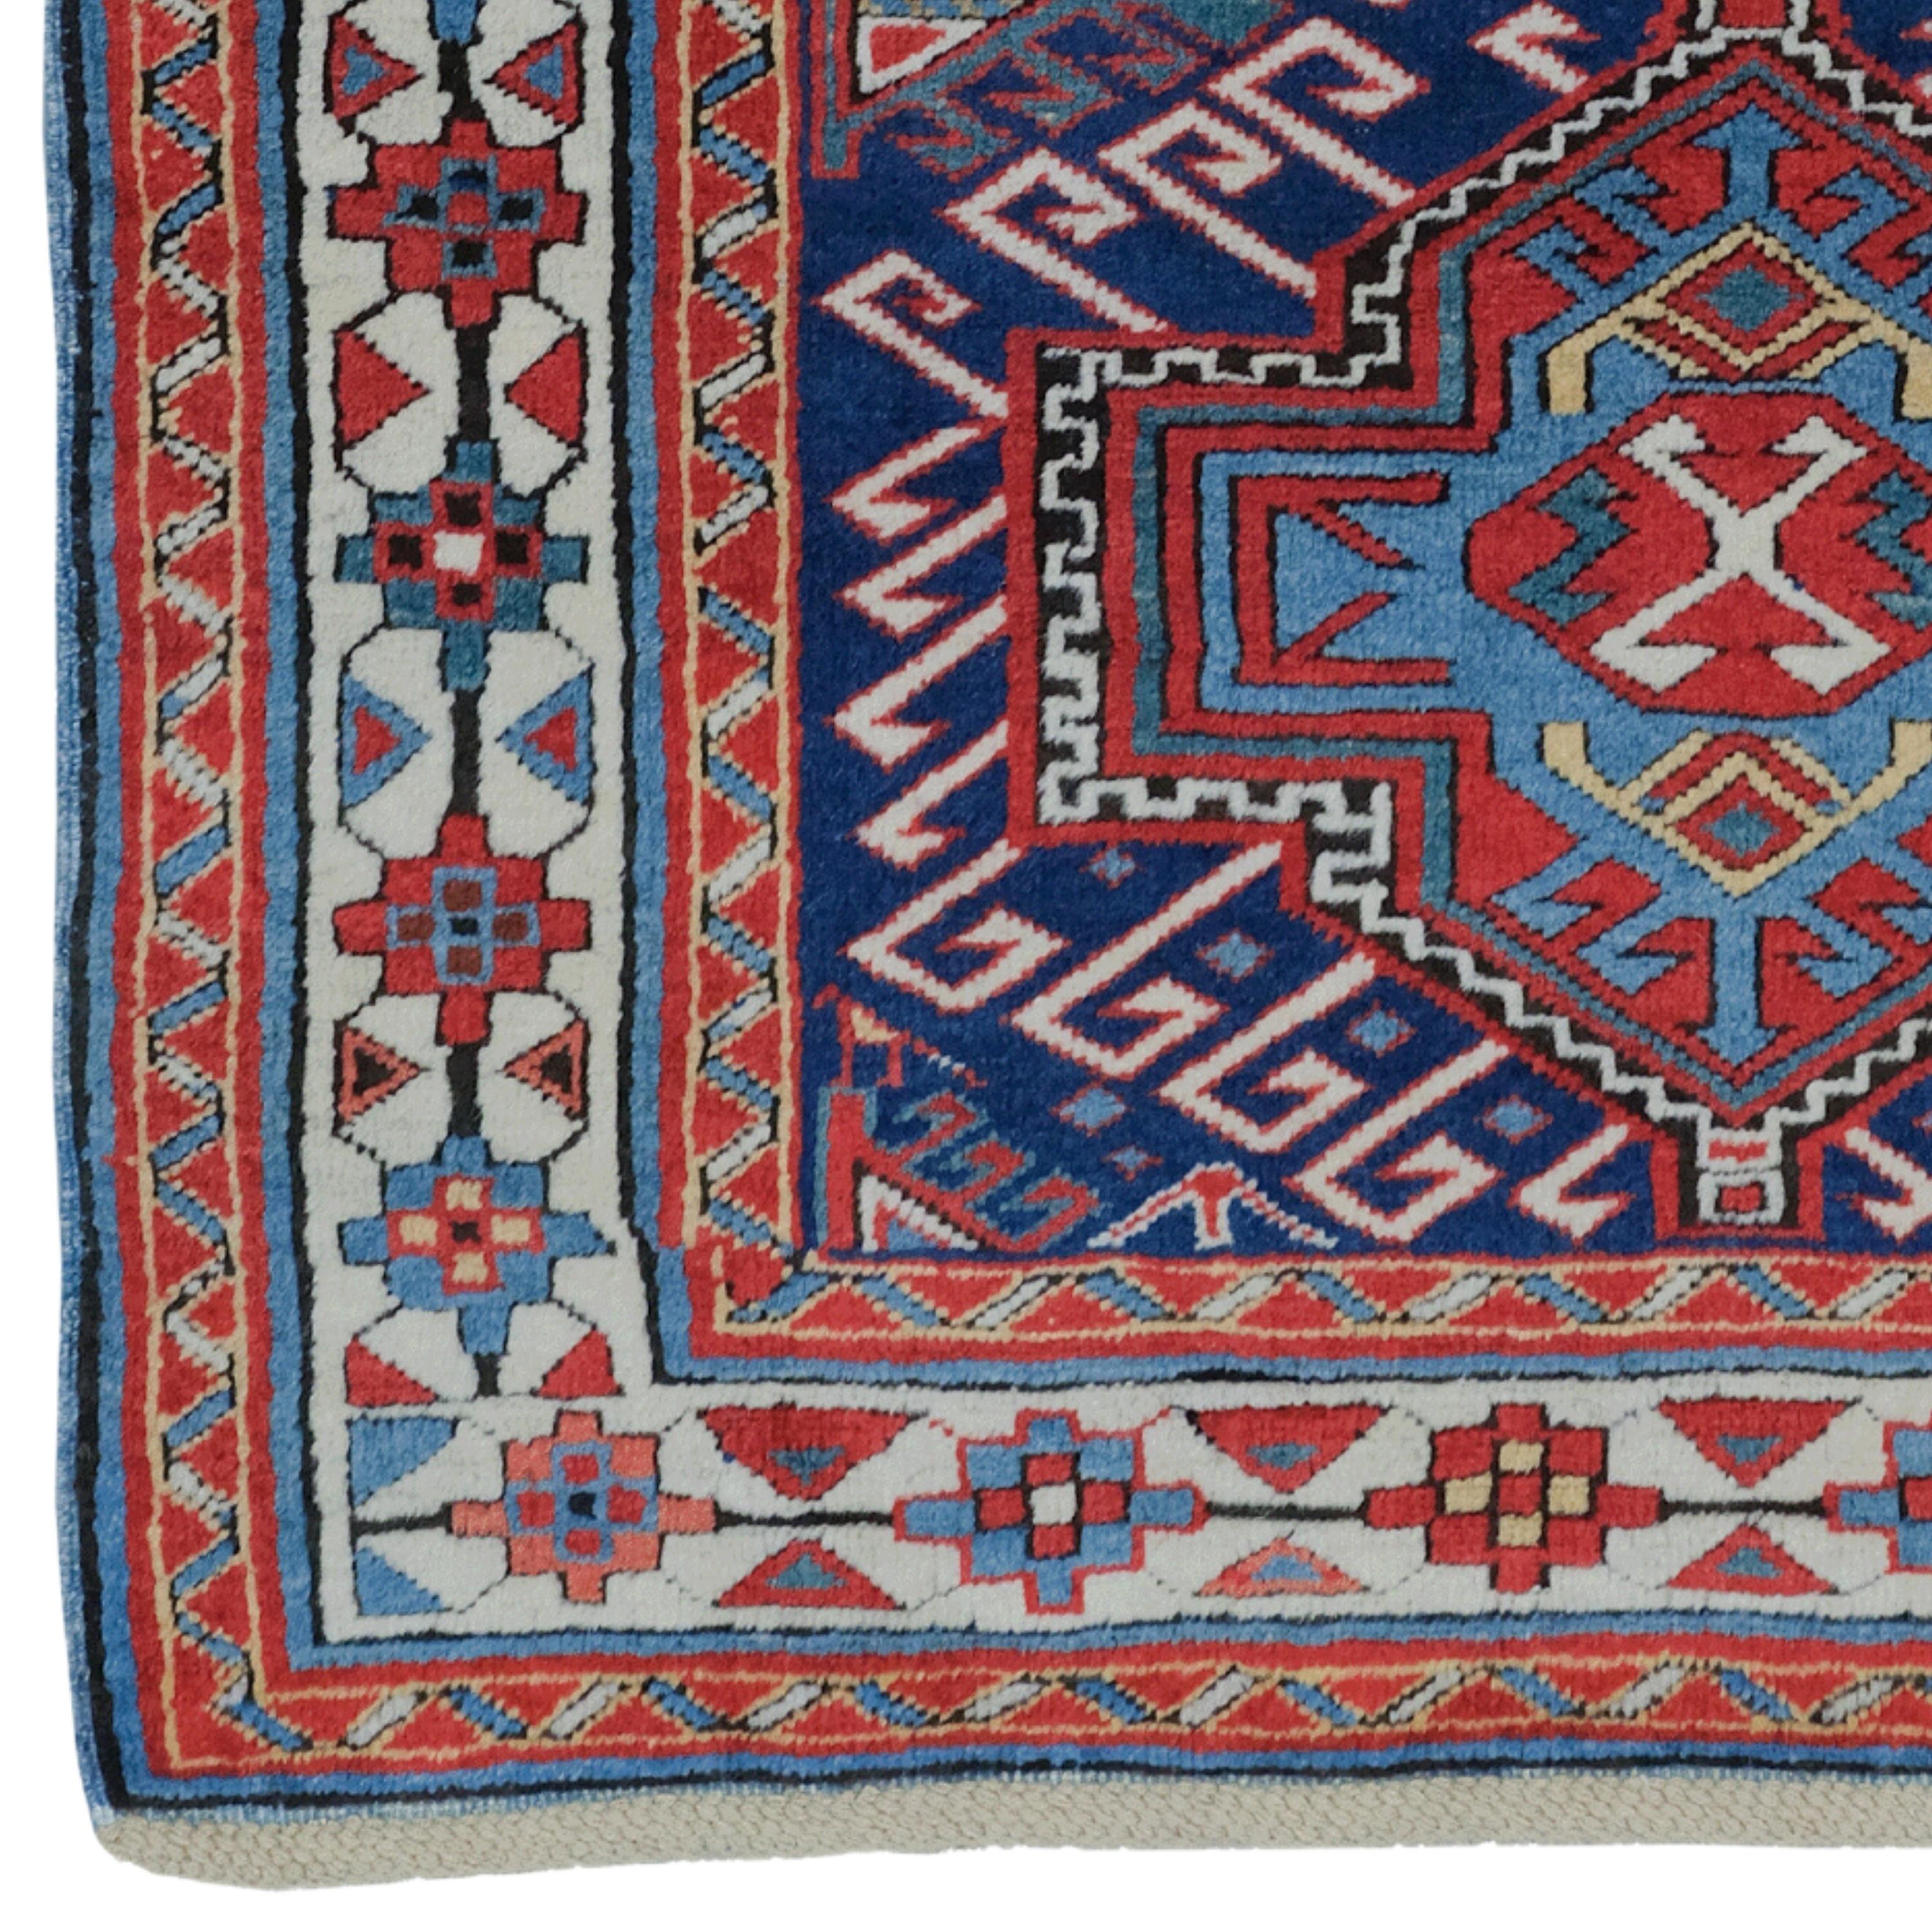 A Historical Heritage: Antique Caucasian Akstafa Carpet from the End of the 19th Century

If you want to add historical and artistic value to your home, this antique carpet is for you. This carpet is a Caucasian Akstafa carpet from the last quarter